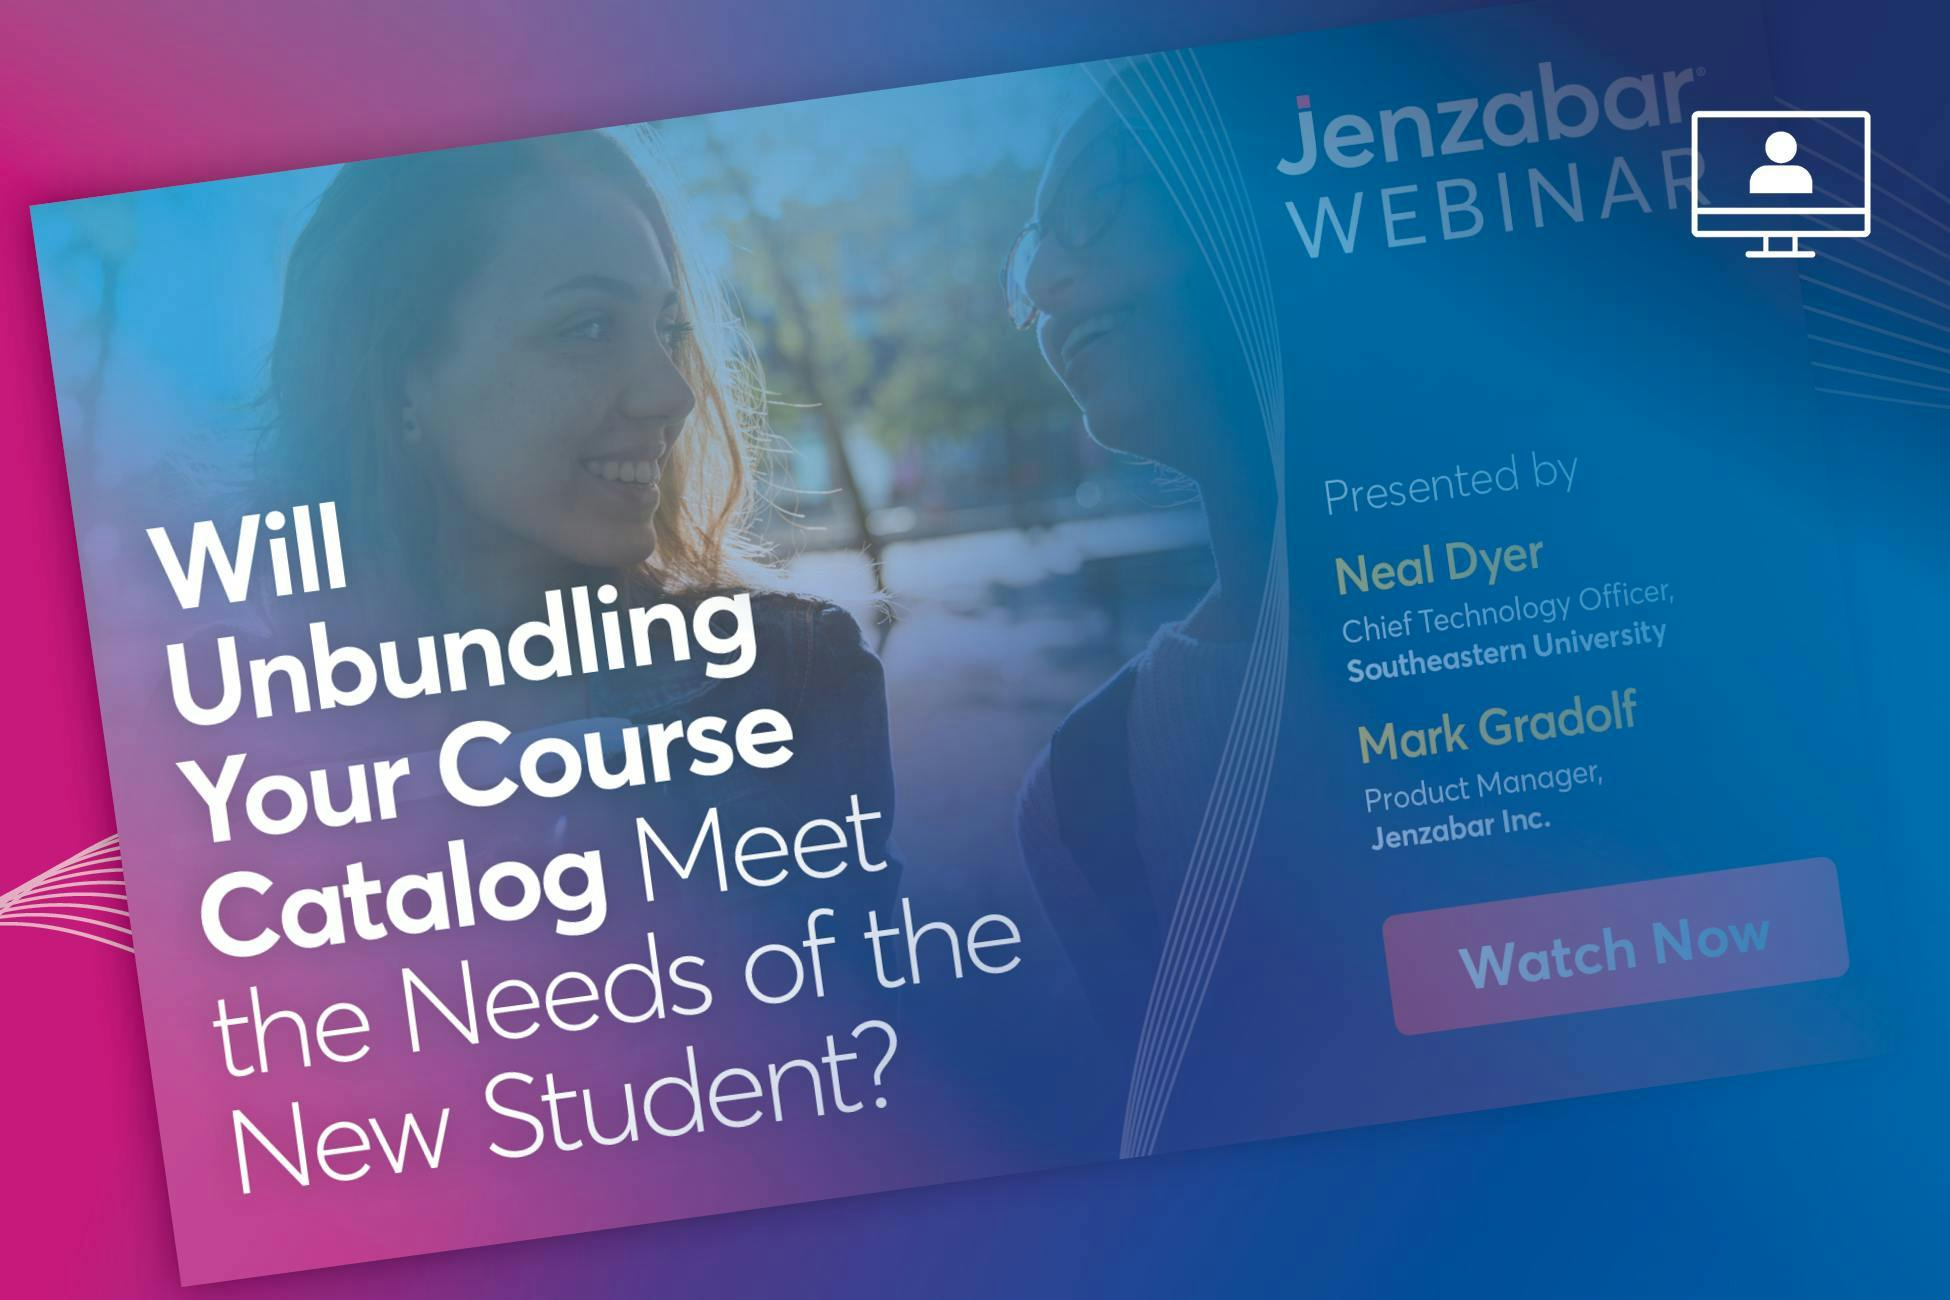 Will Unbundling Your Course Catalog Meet the Needs of the New Student? 